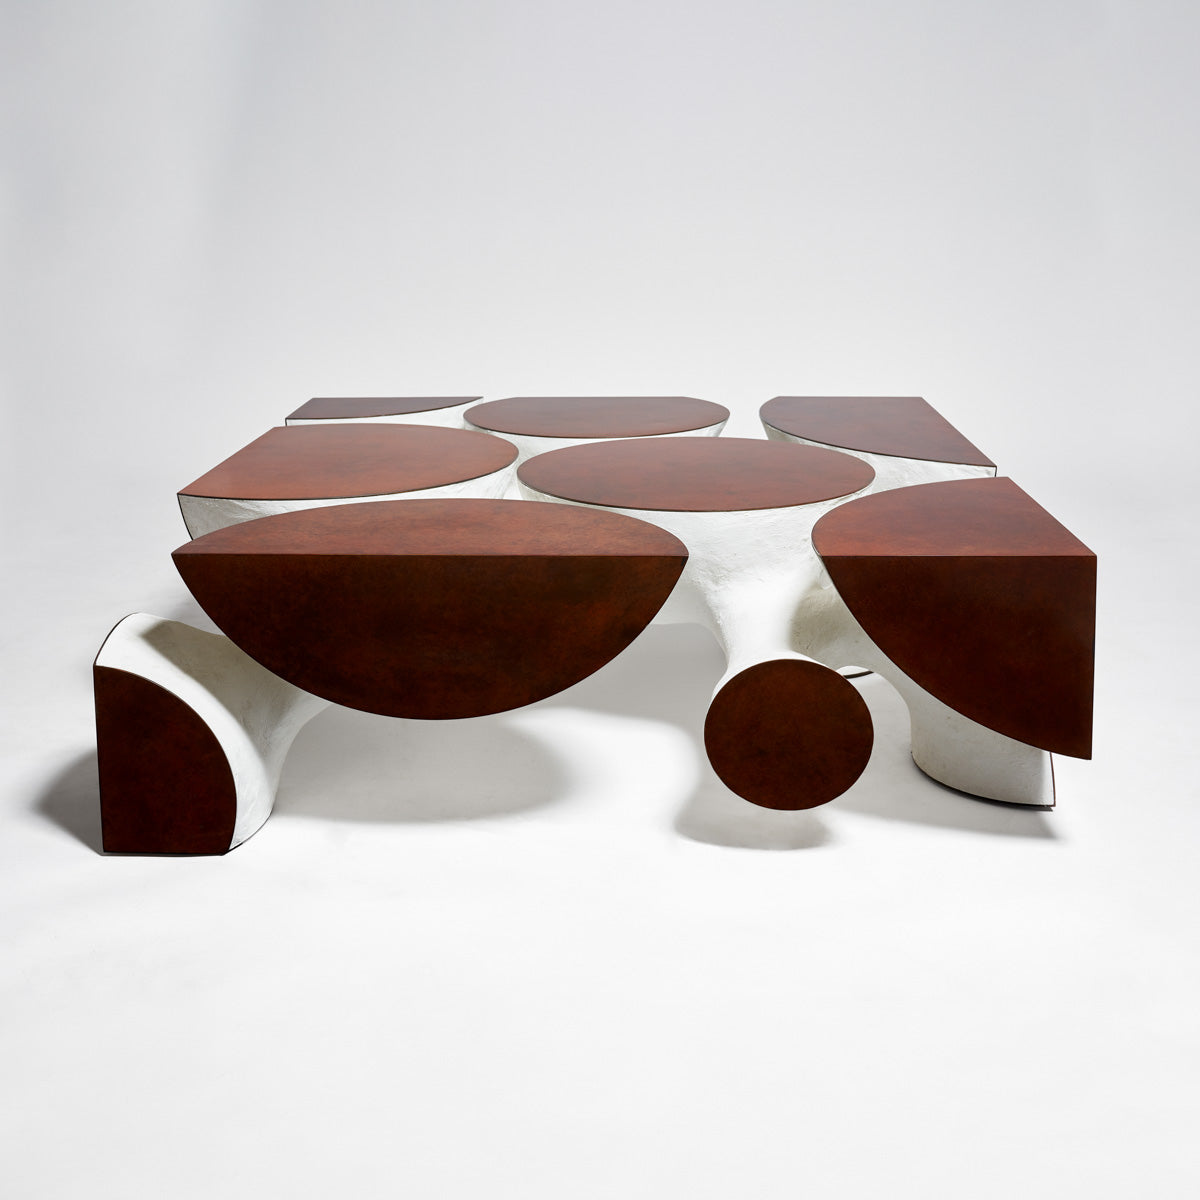 Cube Variations 2 (Truncation) - Coffee Table